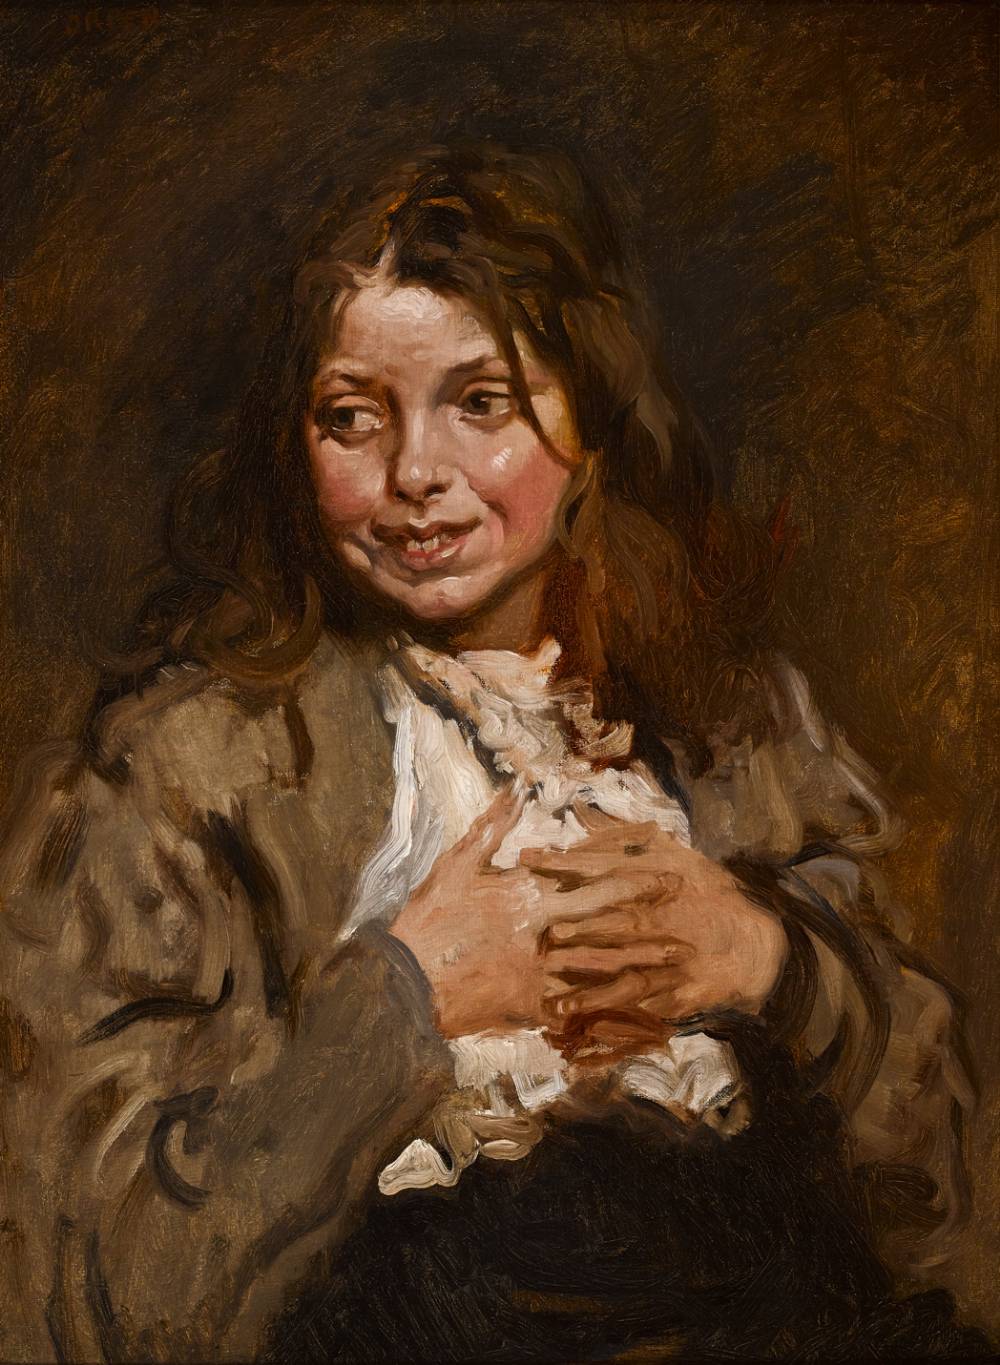 THE BEGGAR GIRL by Sir William Orpen sold for 34,000 at Whyte's Auctions